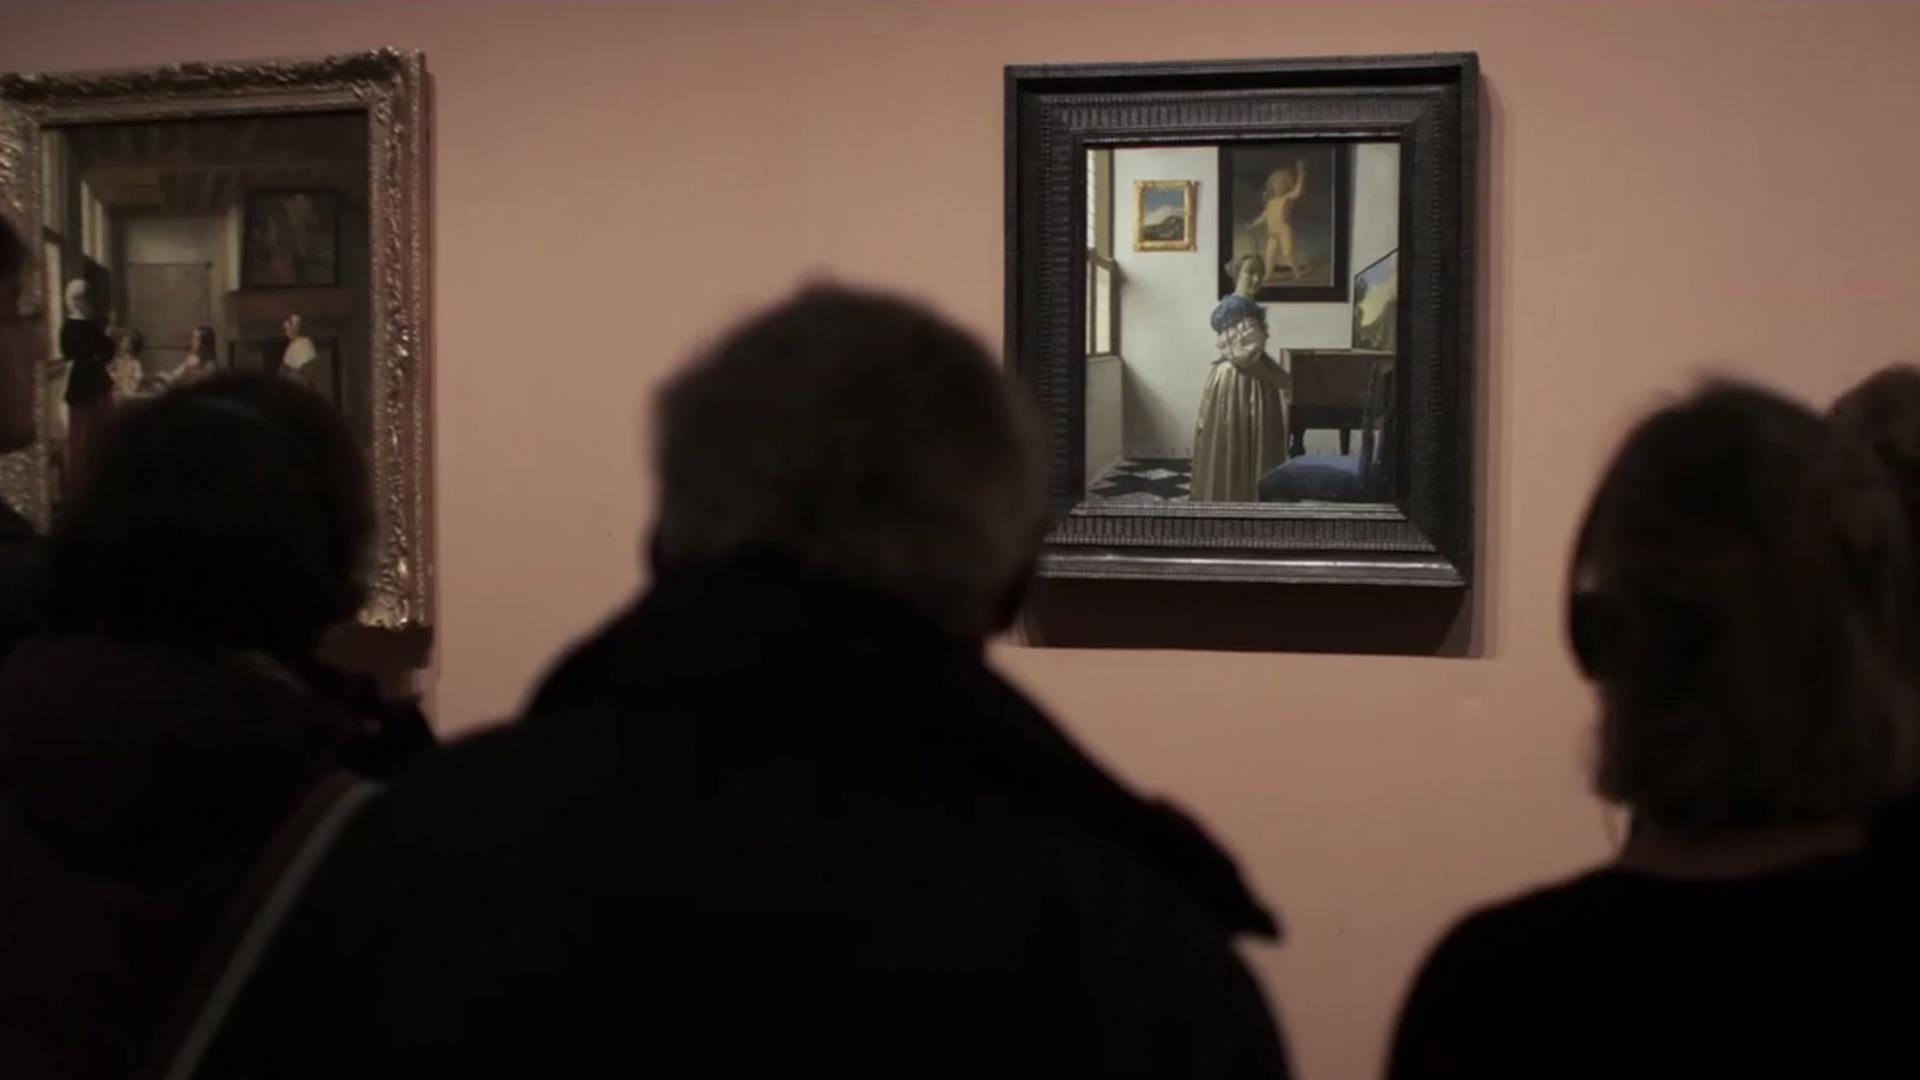 Still from Frederick Wiseman's film 'National Gallery'